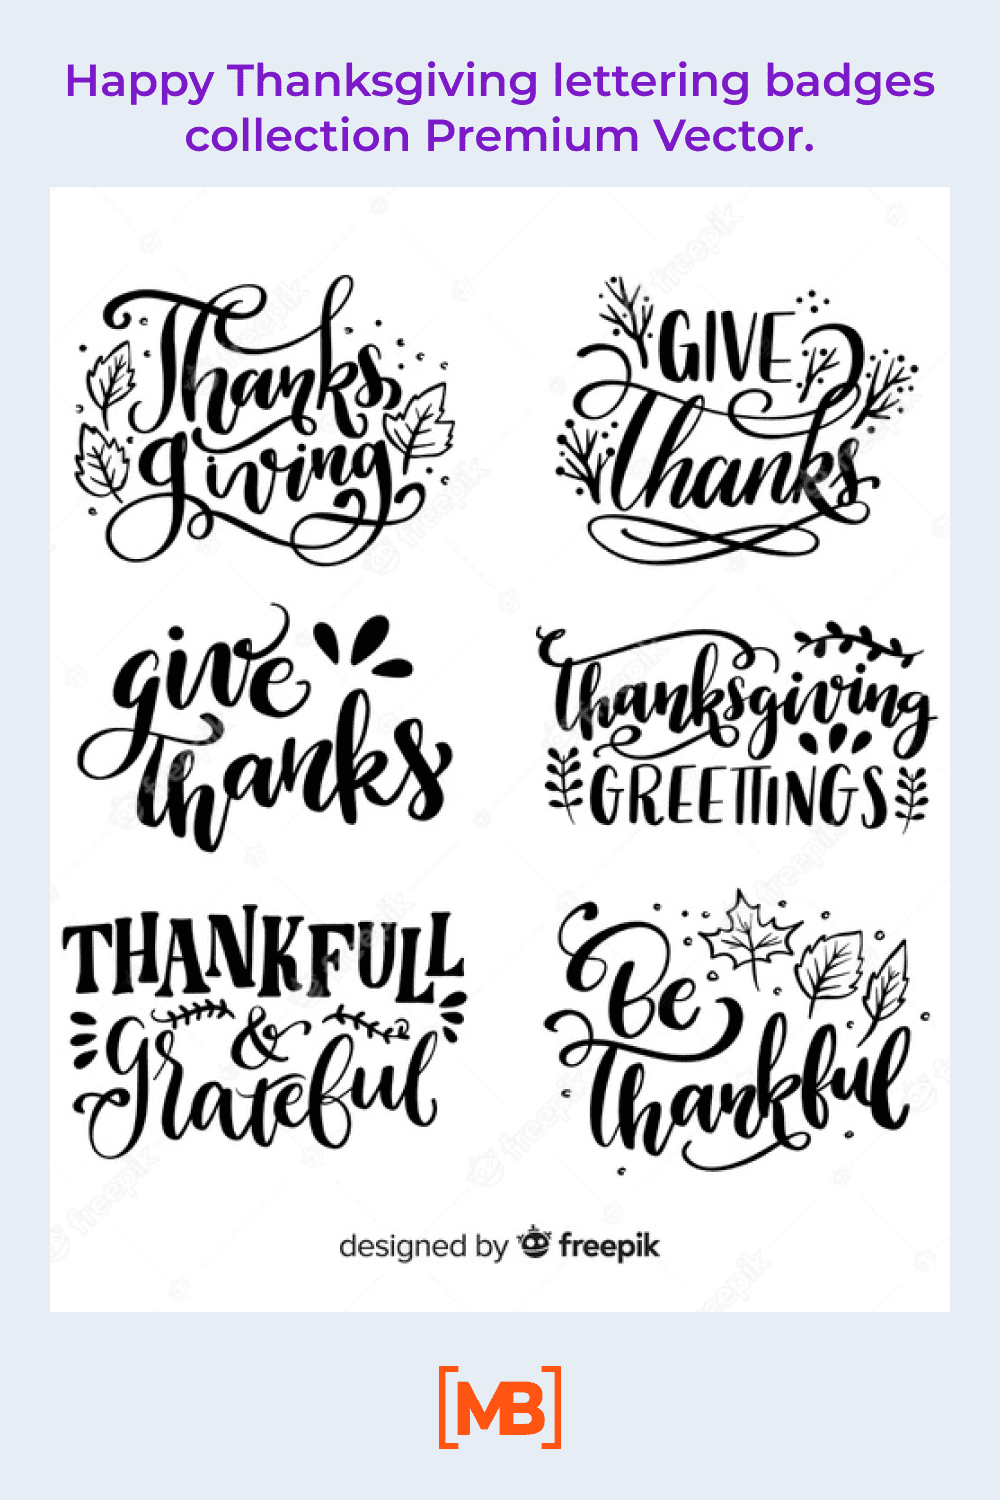 Happy Thanksgiving lettering badges collection.